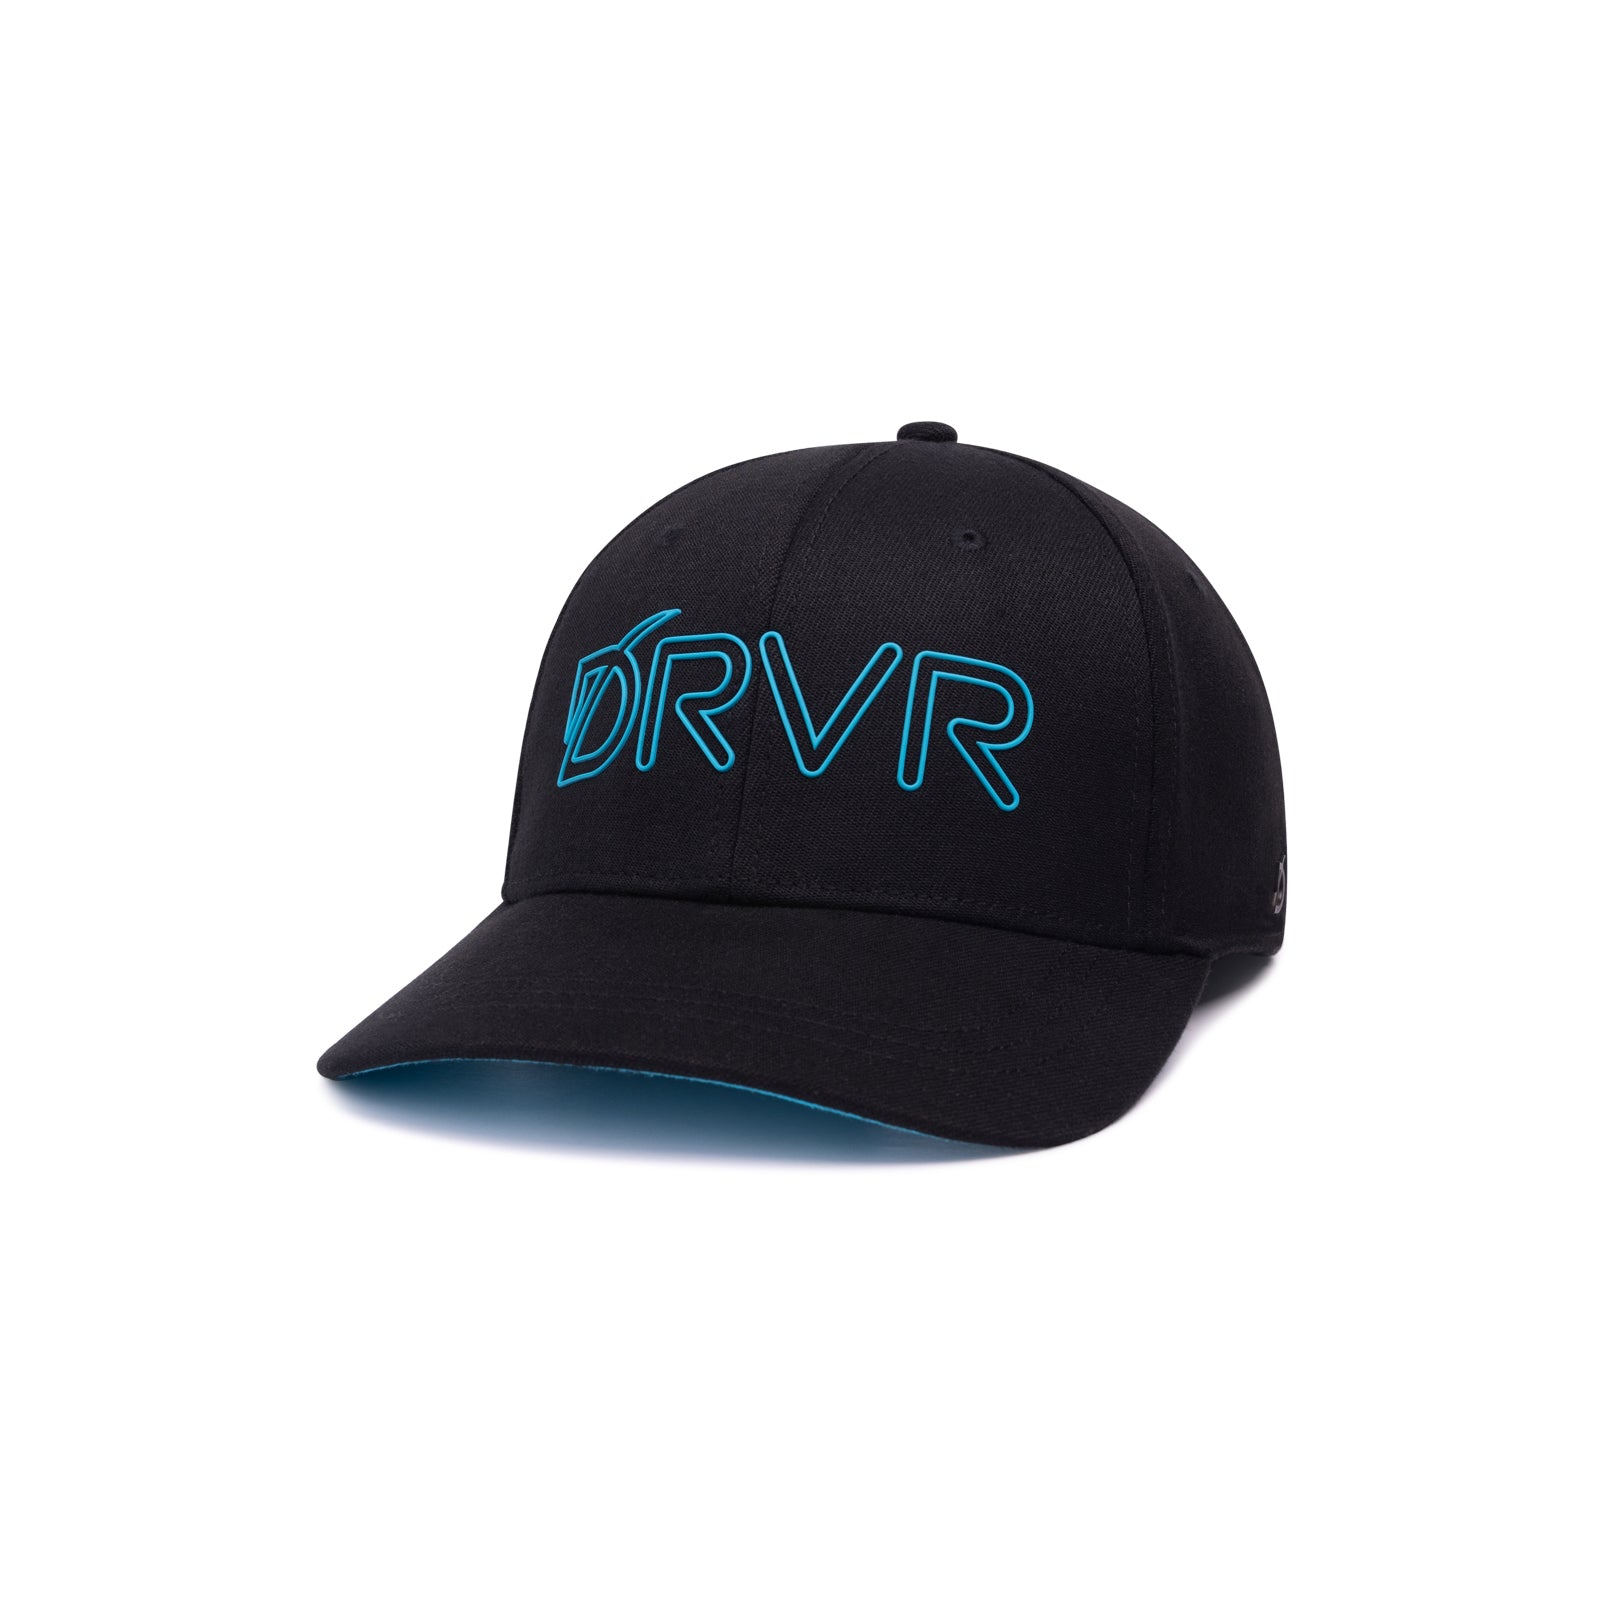 DRVR TIPS THE – FROM